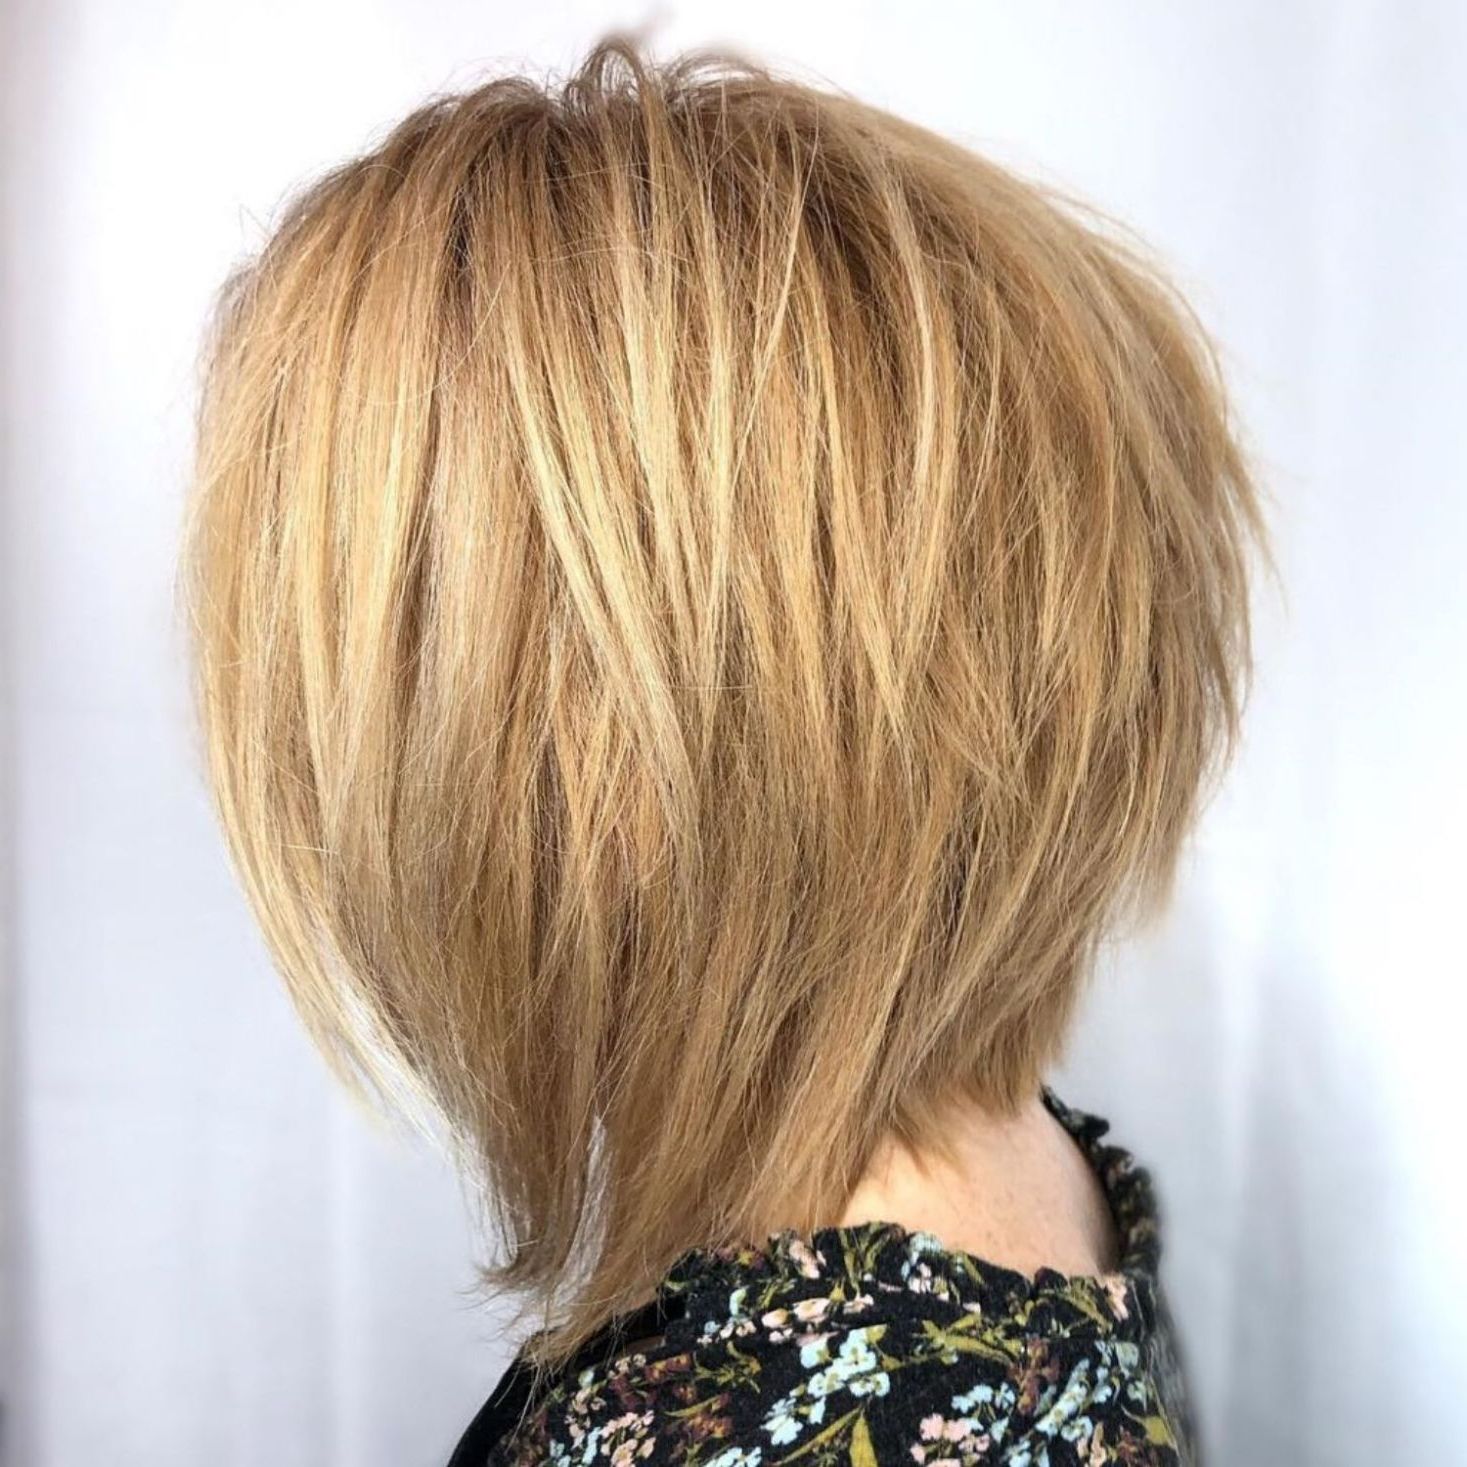 60 Short Shag Hairstyles That You Simply Can't Miss | Hair Regarding Razored Honey Blonde Bob Hairstyles (View 2 of 20)